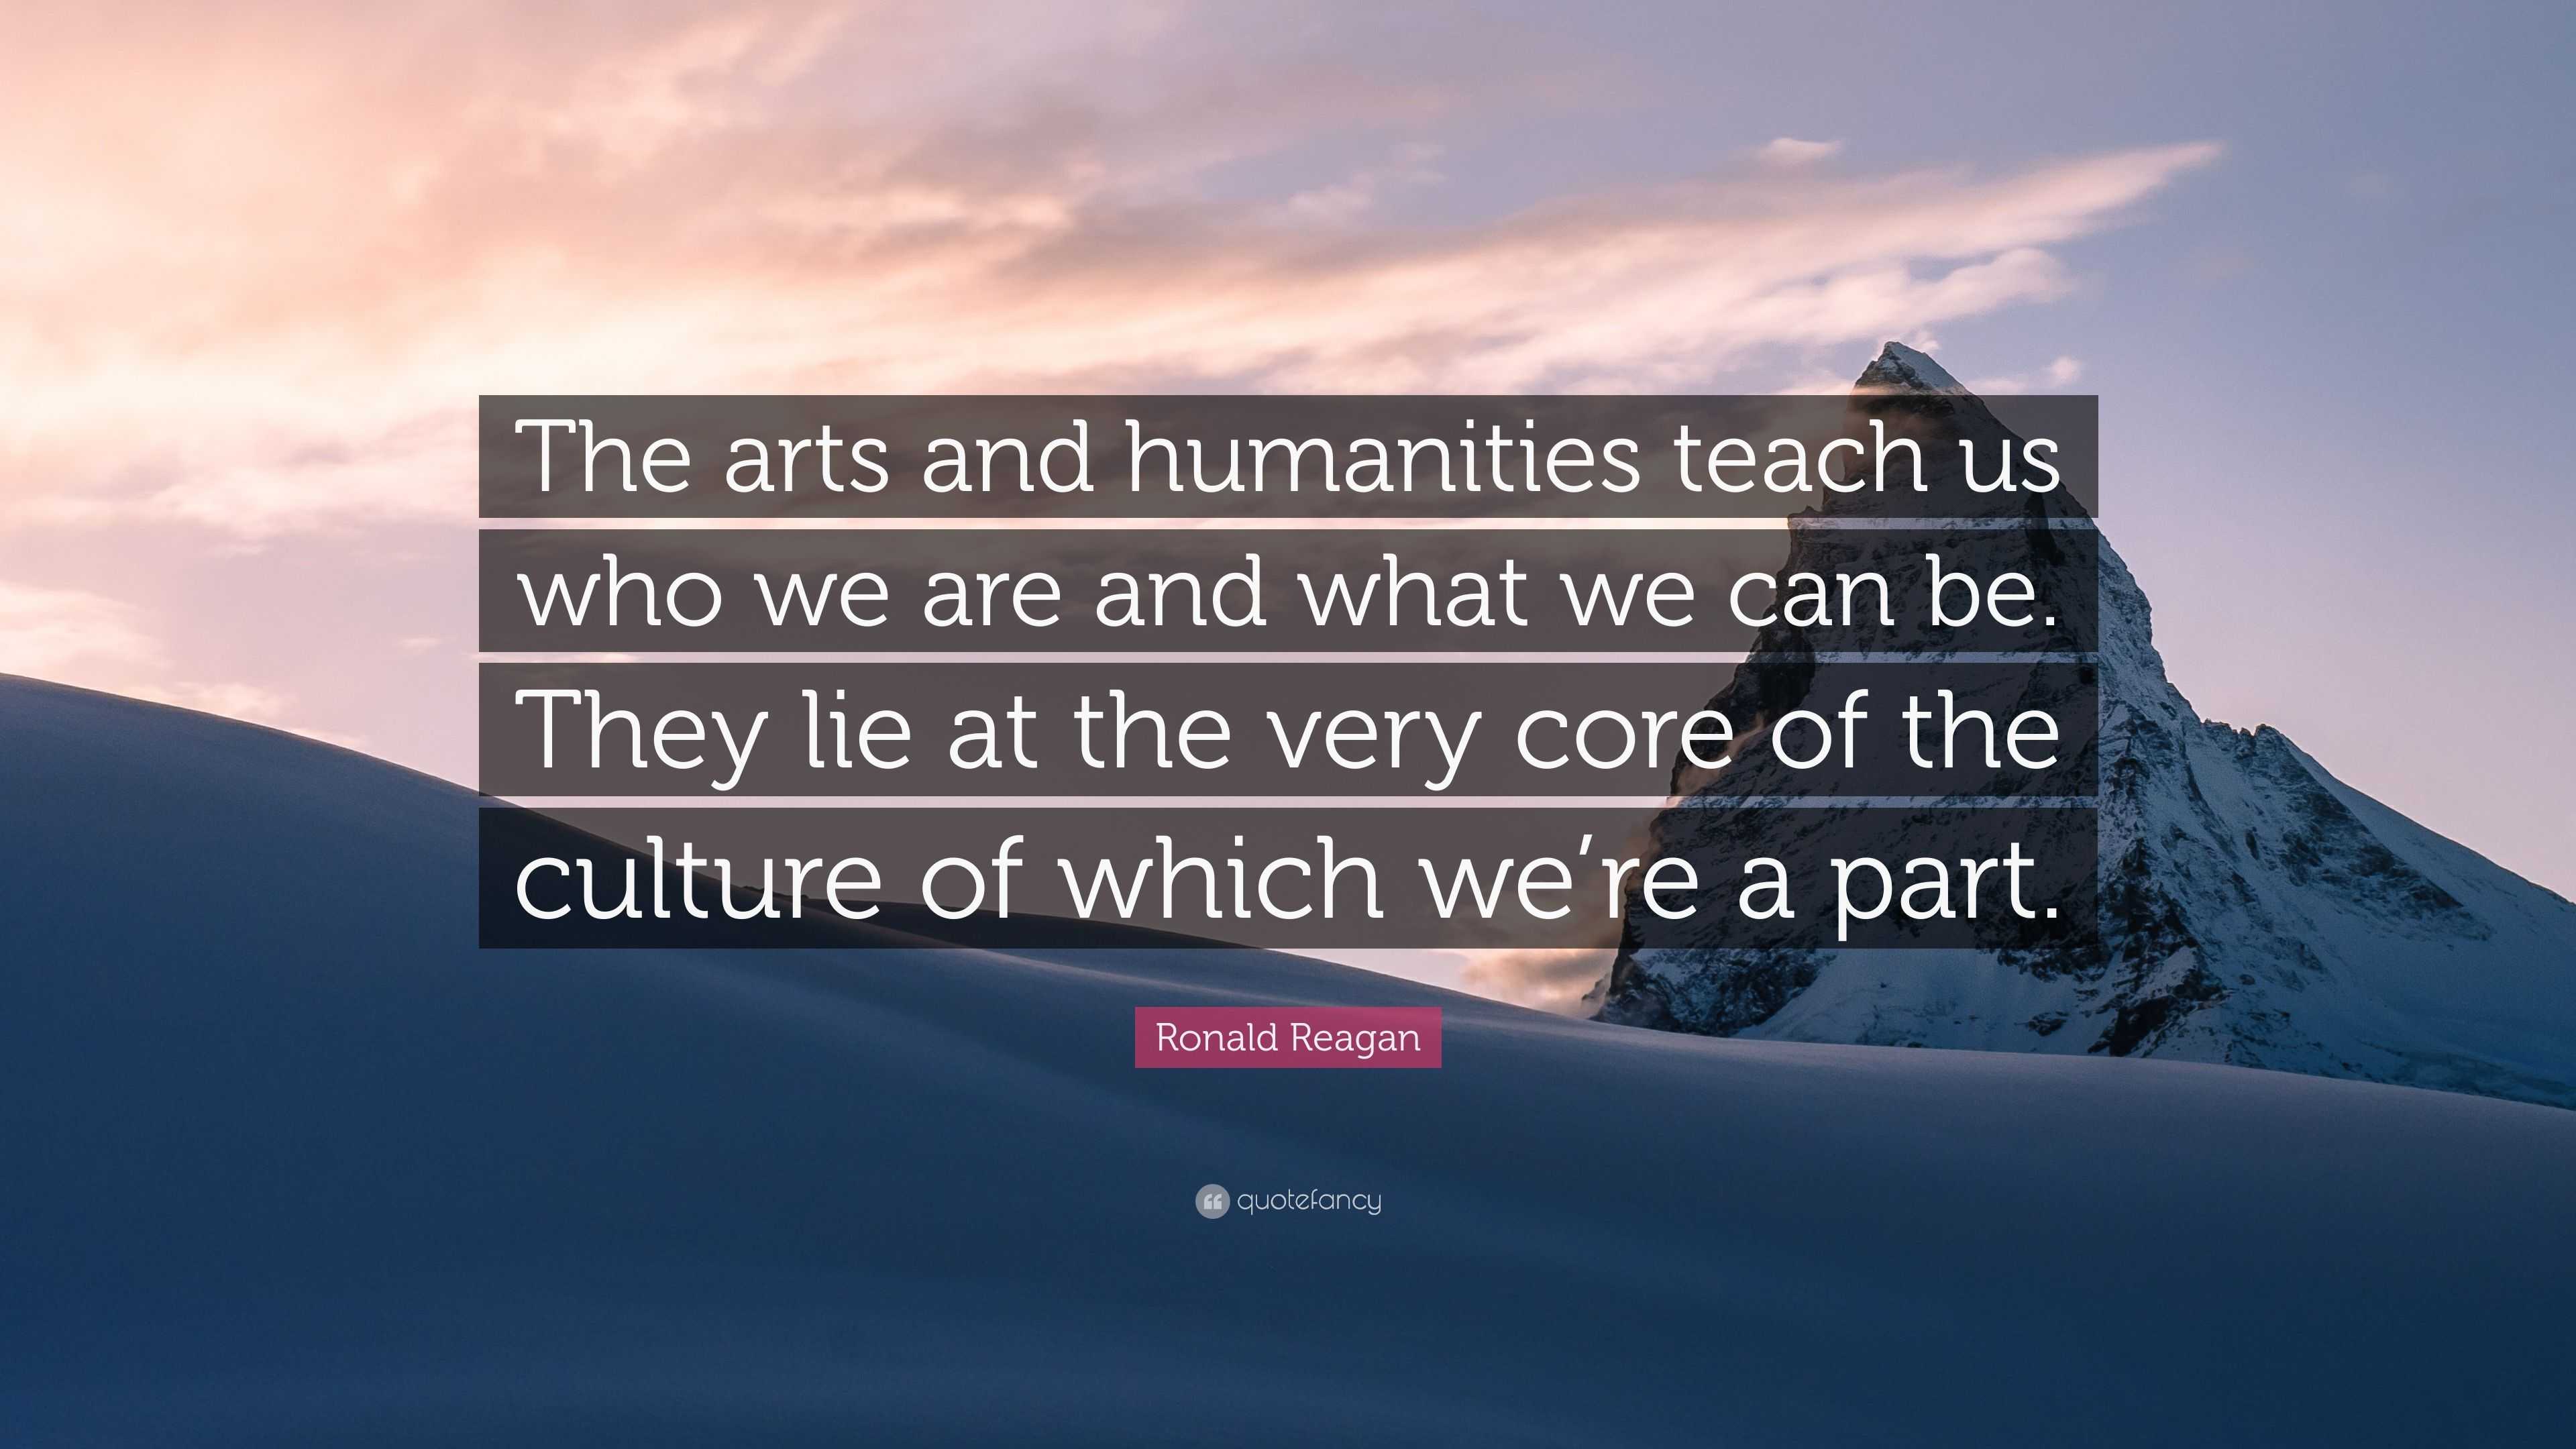 Ronald Reagan Quote: “The arts and humanities teach us who we are and